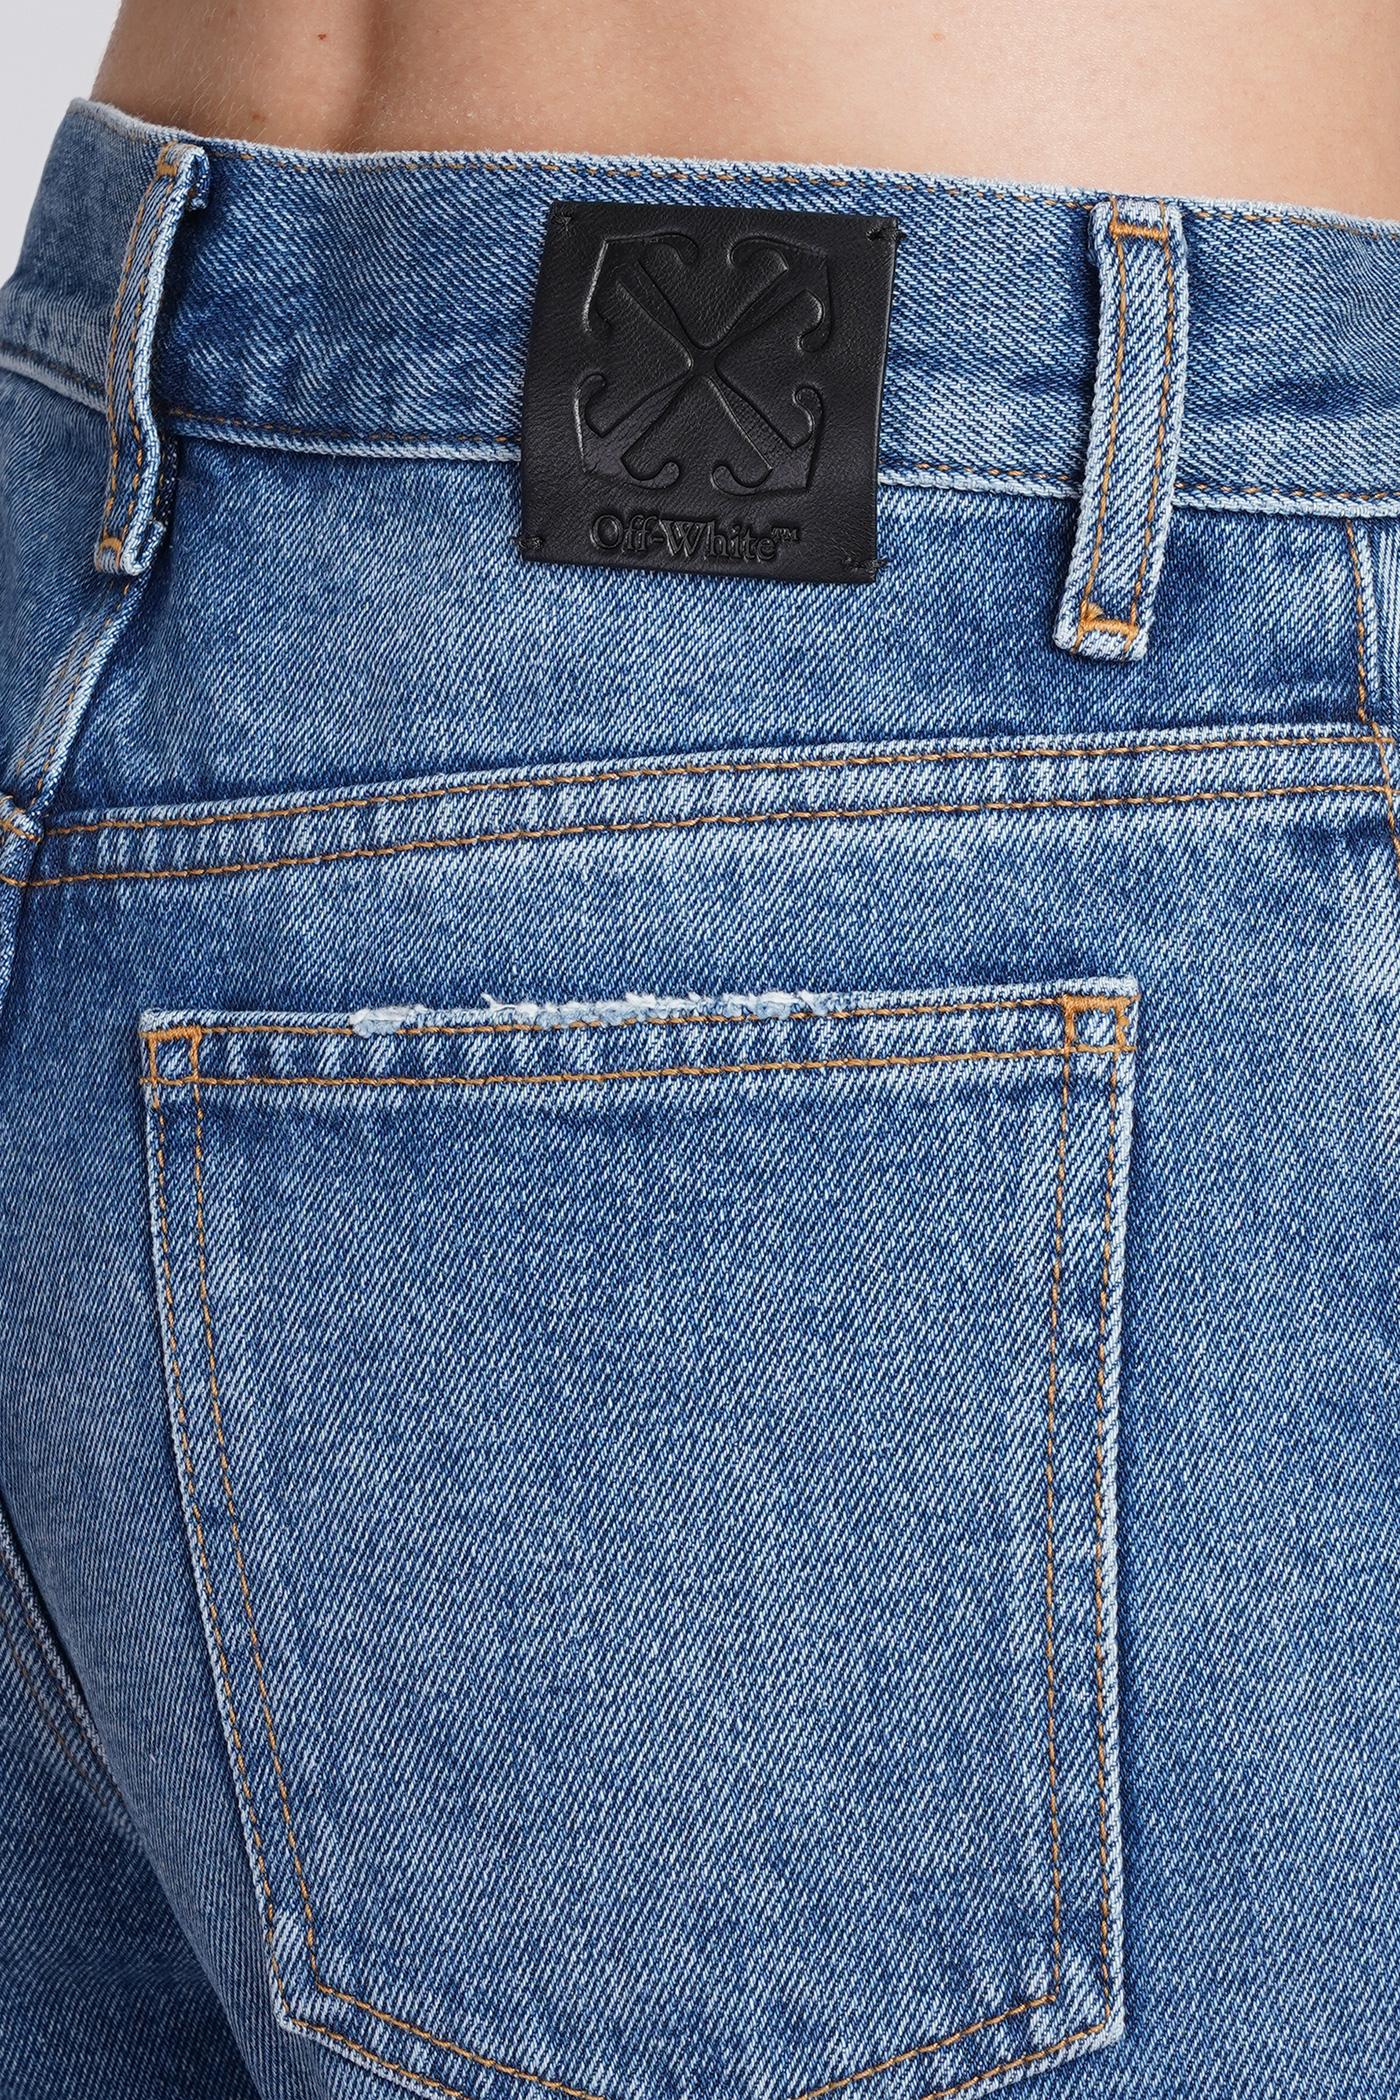 Off-White c/o Virgil Abloh Jeans In Blue Cotton